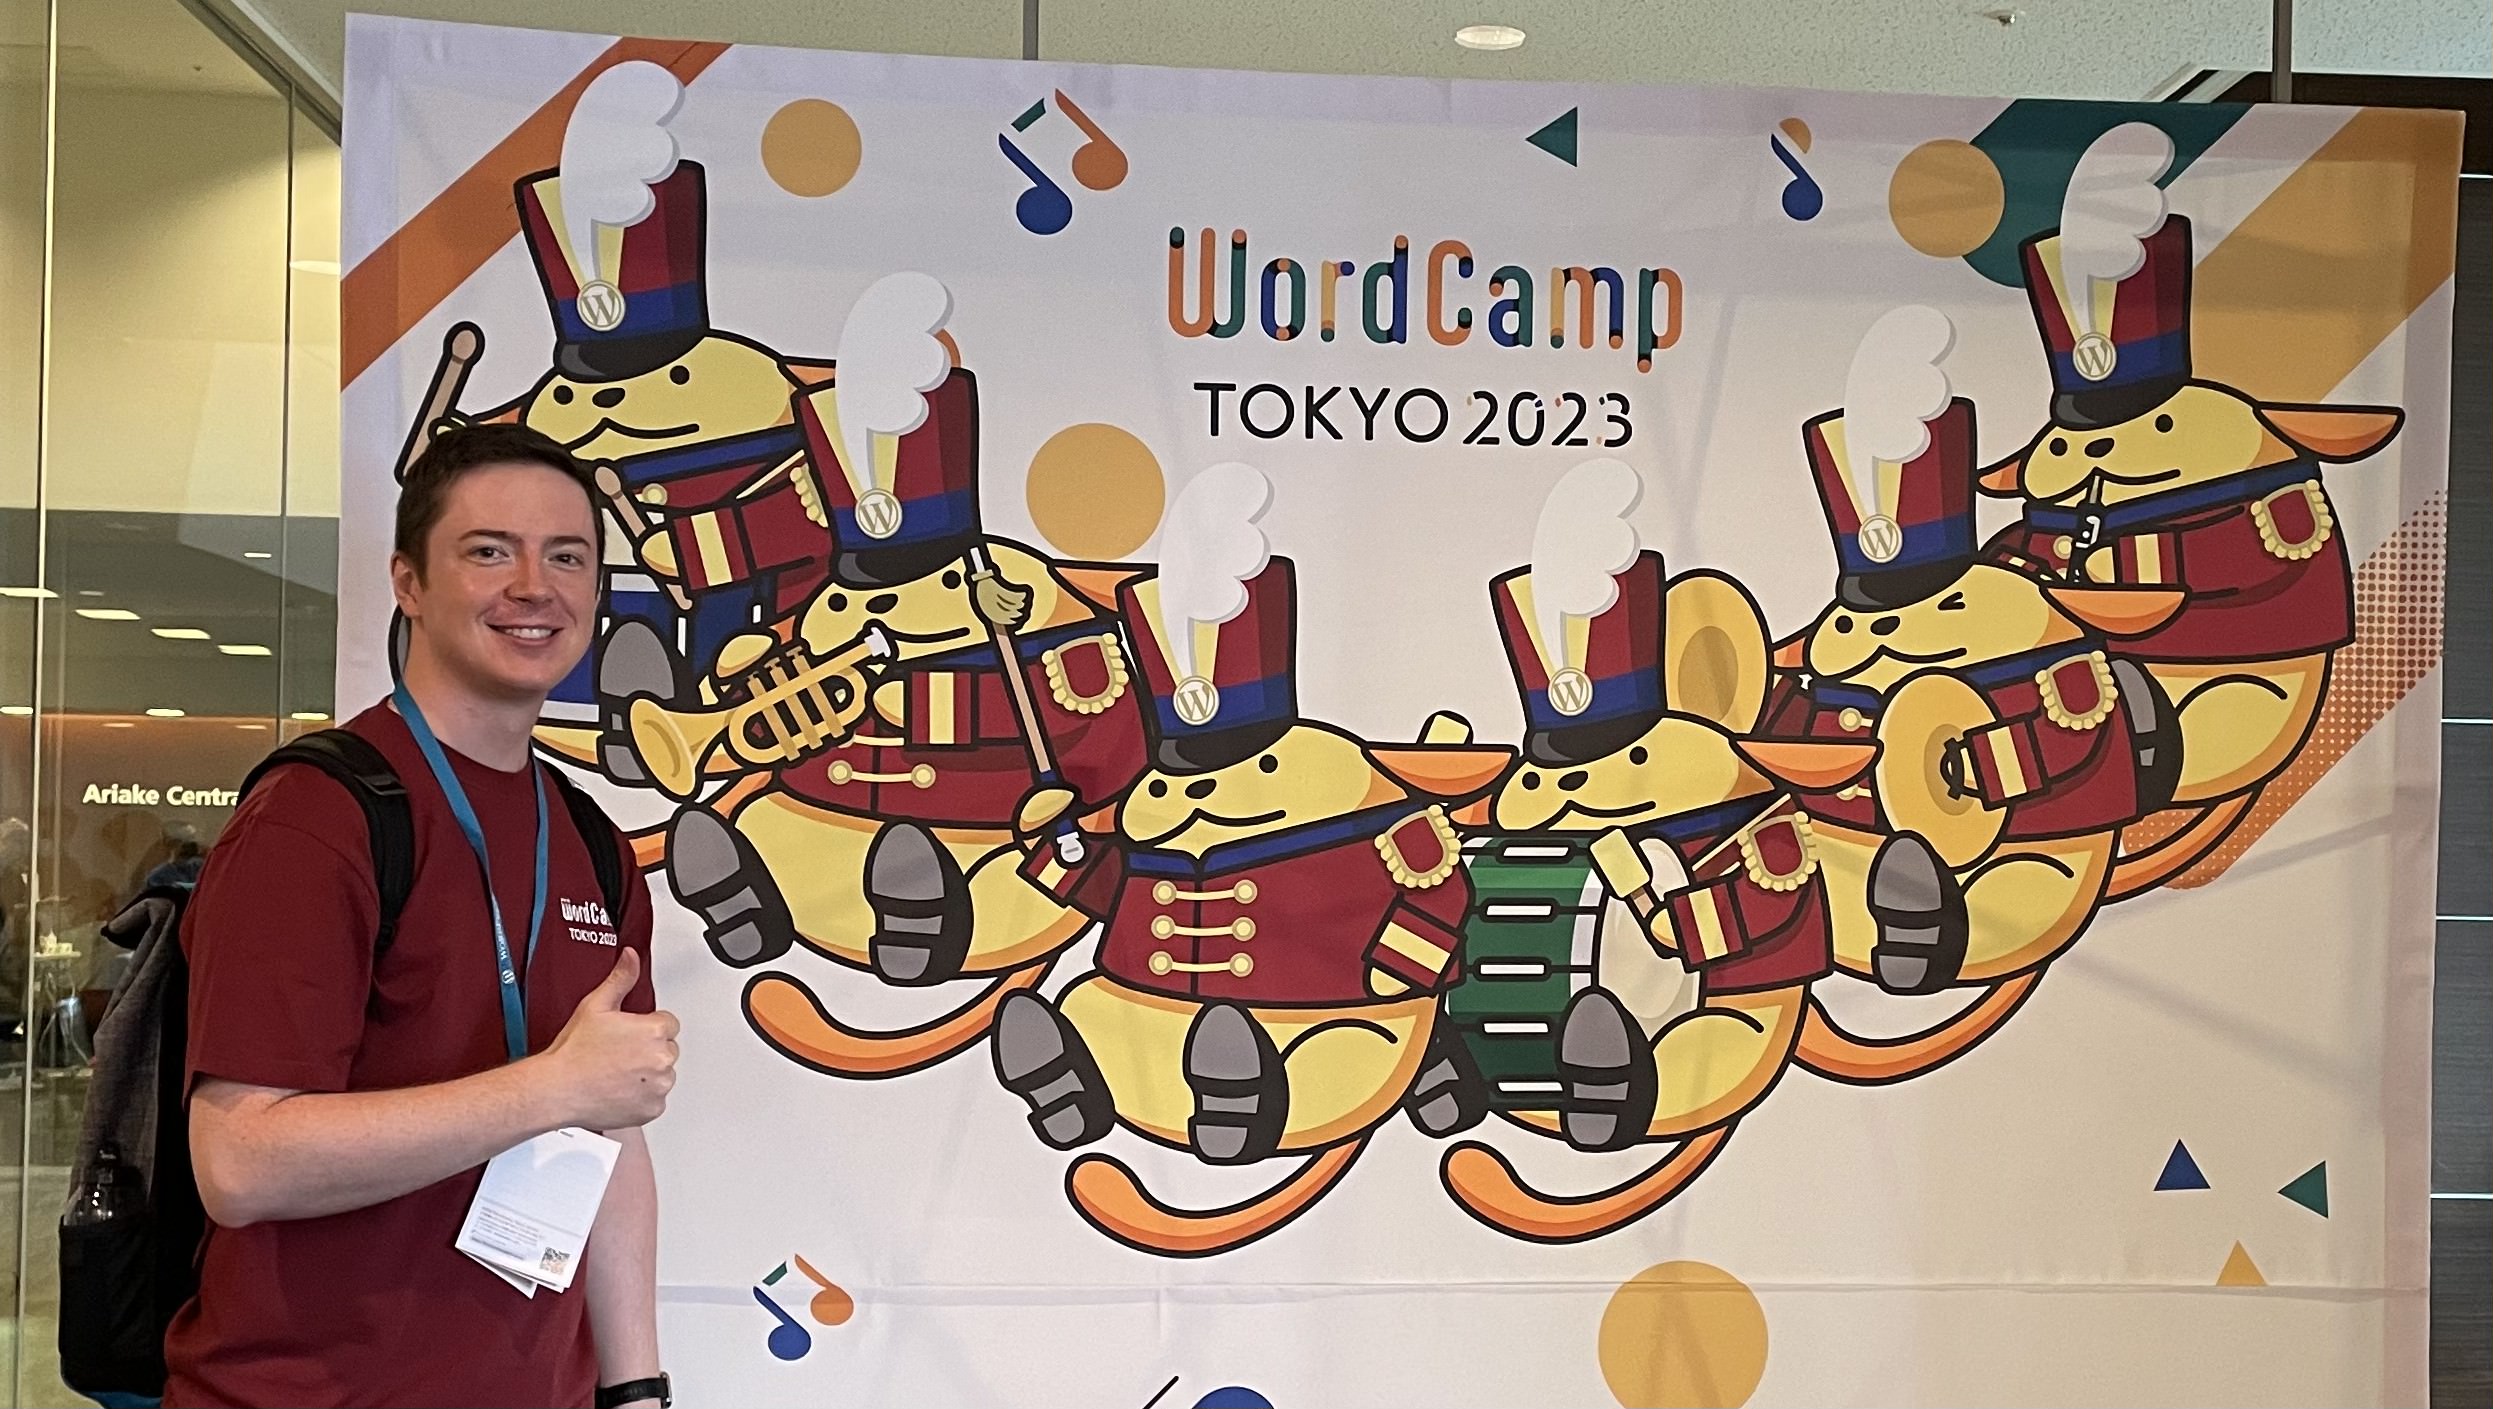 Ben standing in front of the main banner showing Wappus at WordCamp Tokyo 2023